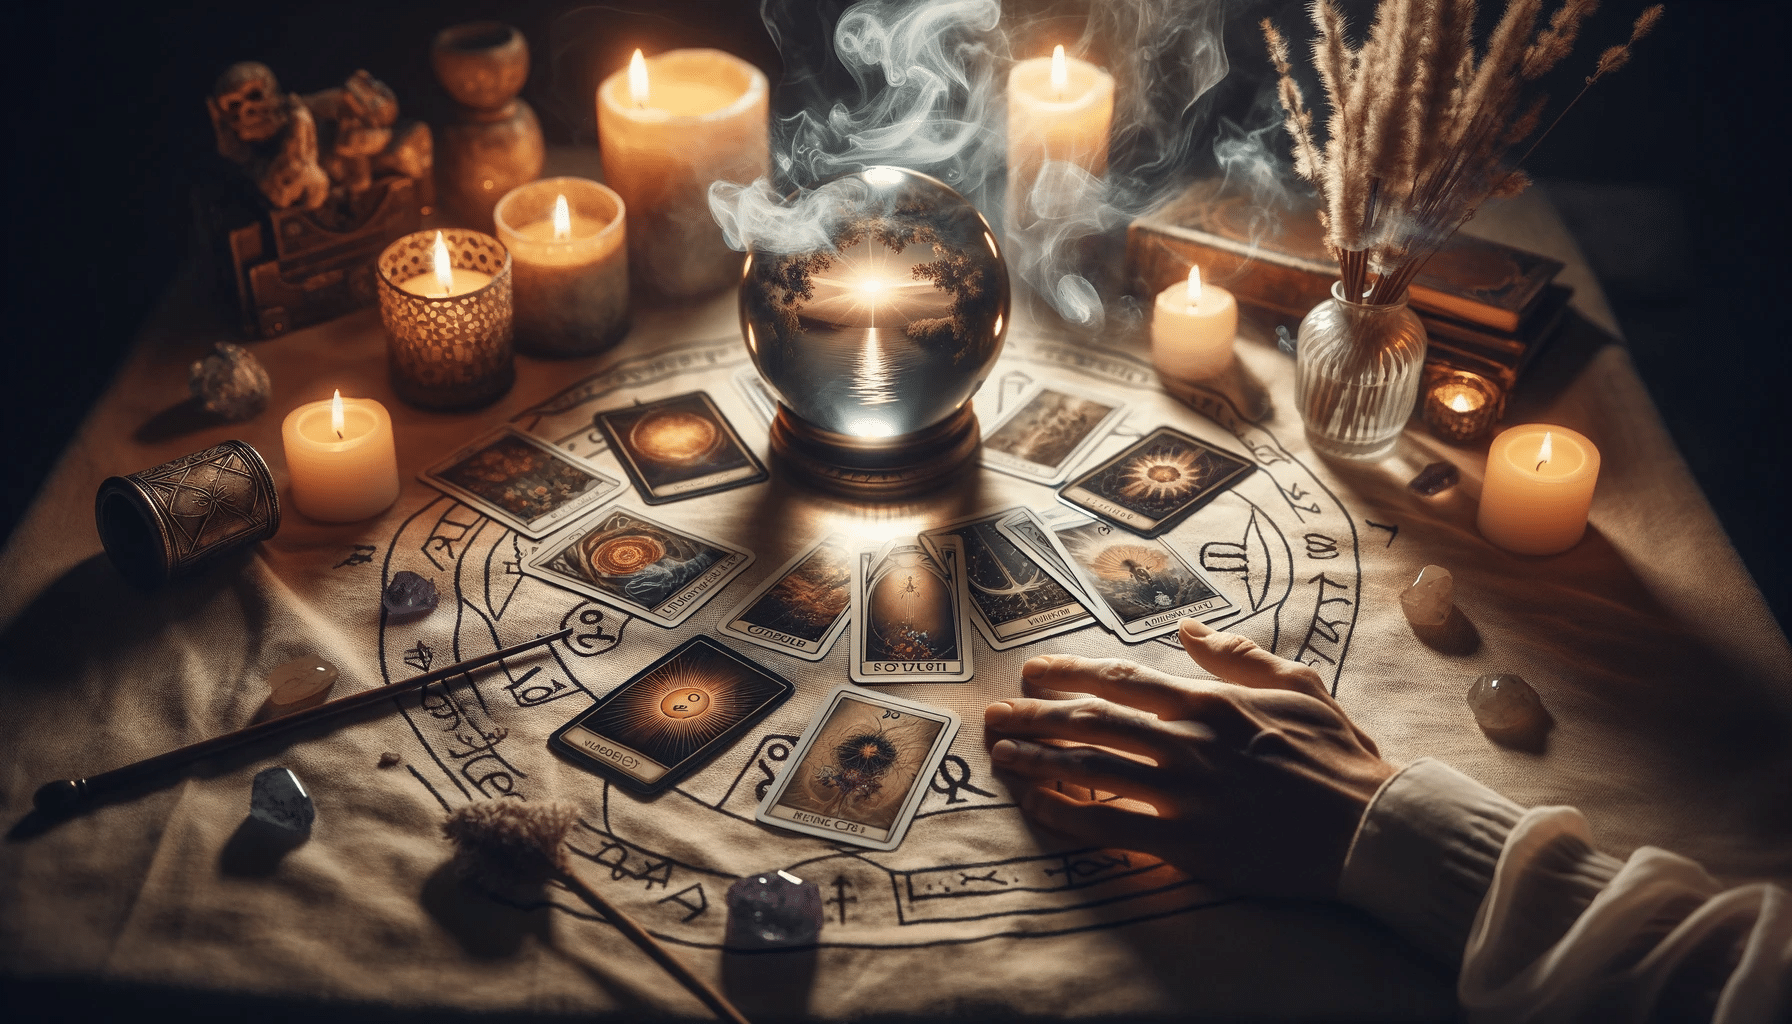 A hand spreads tarot cards on a cloth with a crystal ball and incense, hinting at tarot card meanings and interpretations.